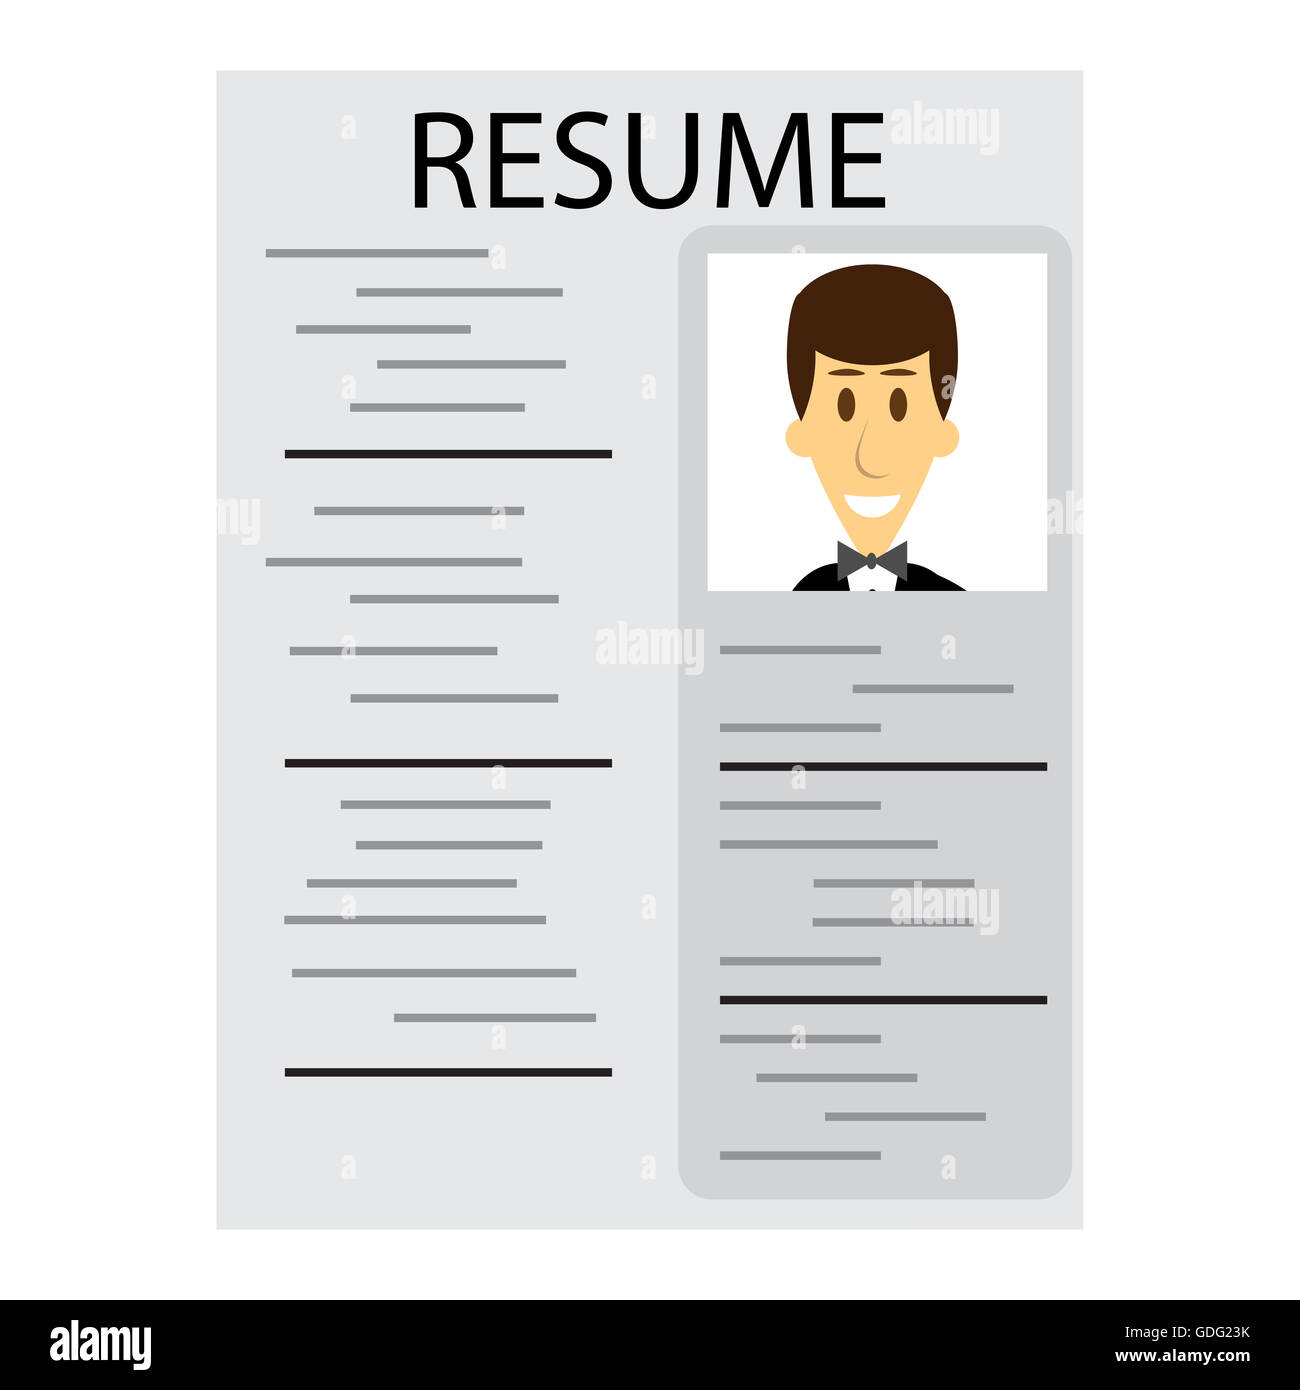 Resume For Employment Cv And Resume Template Job Interview And